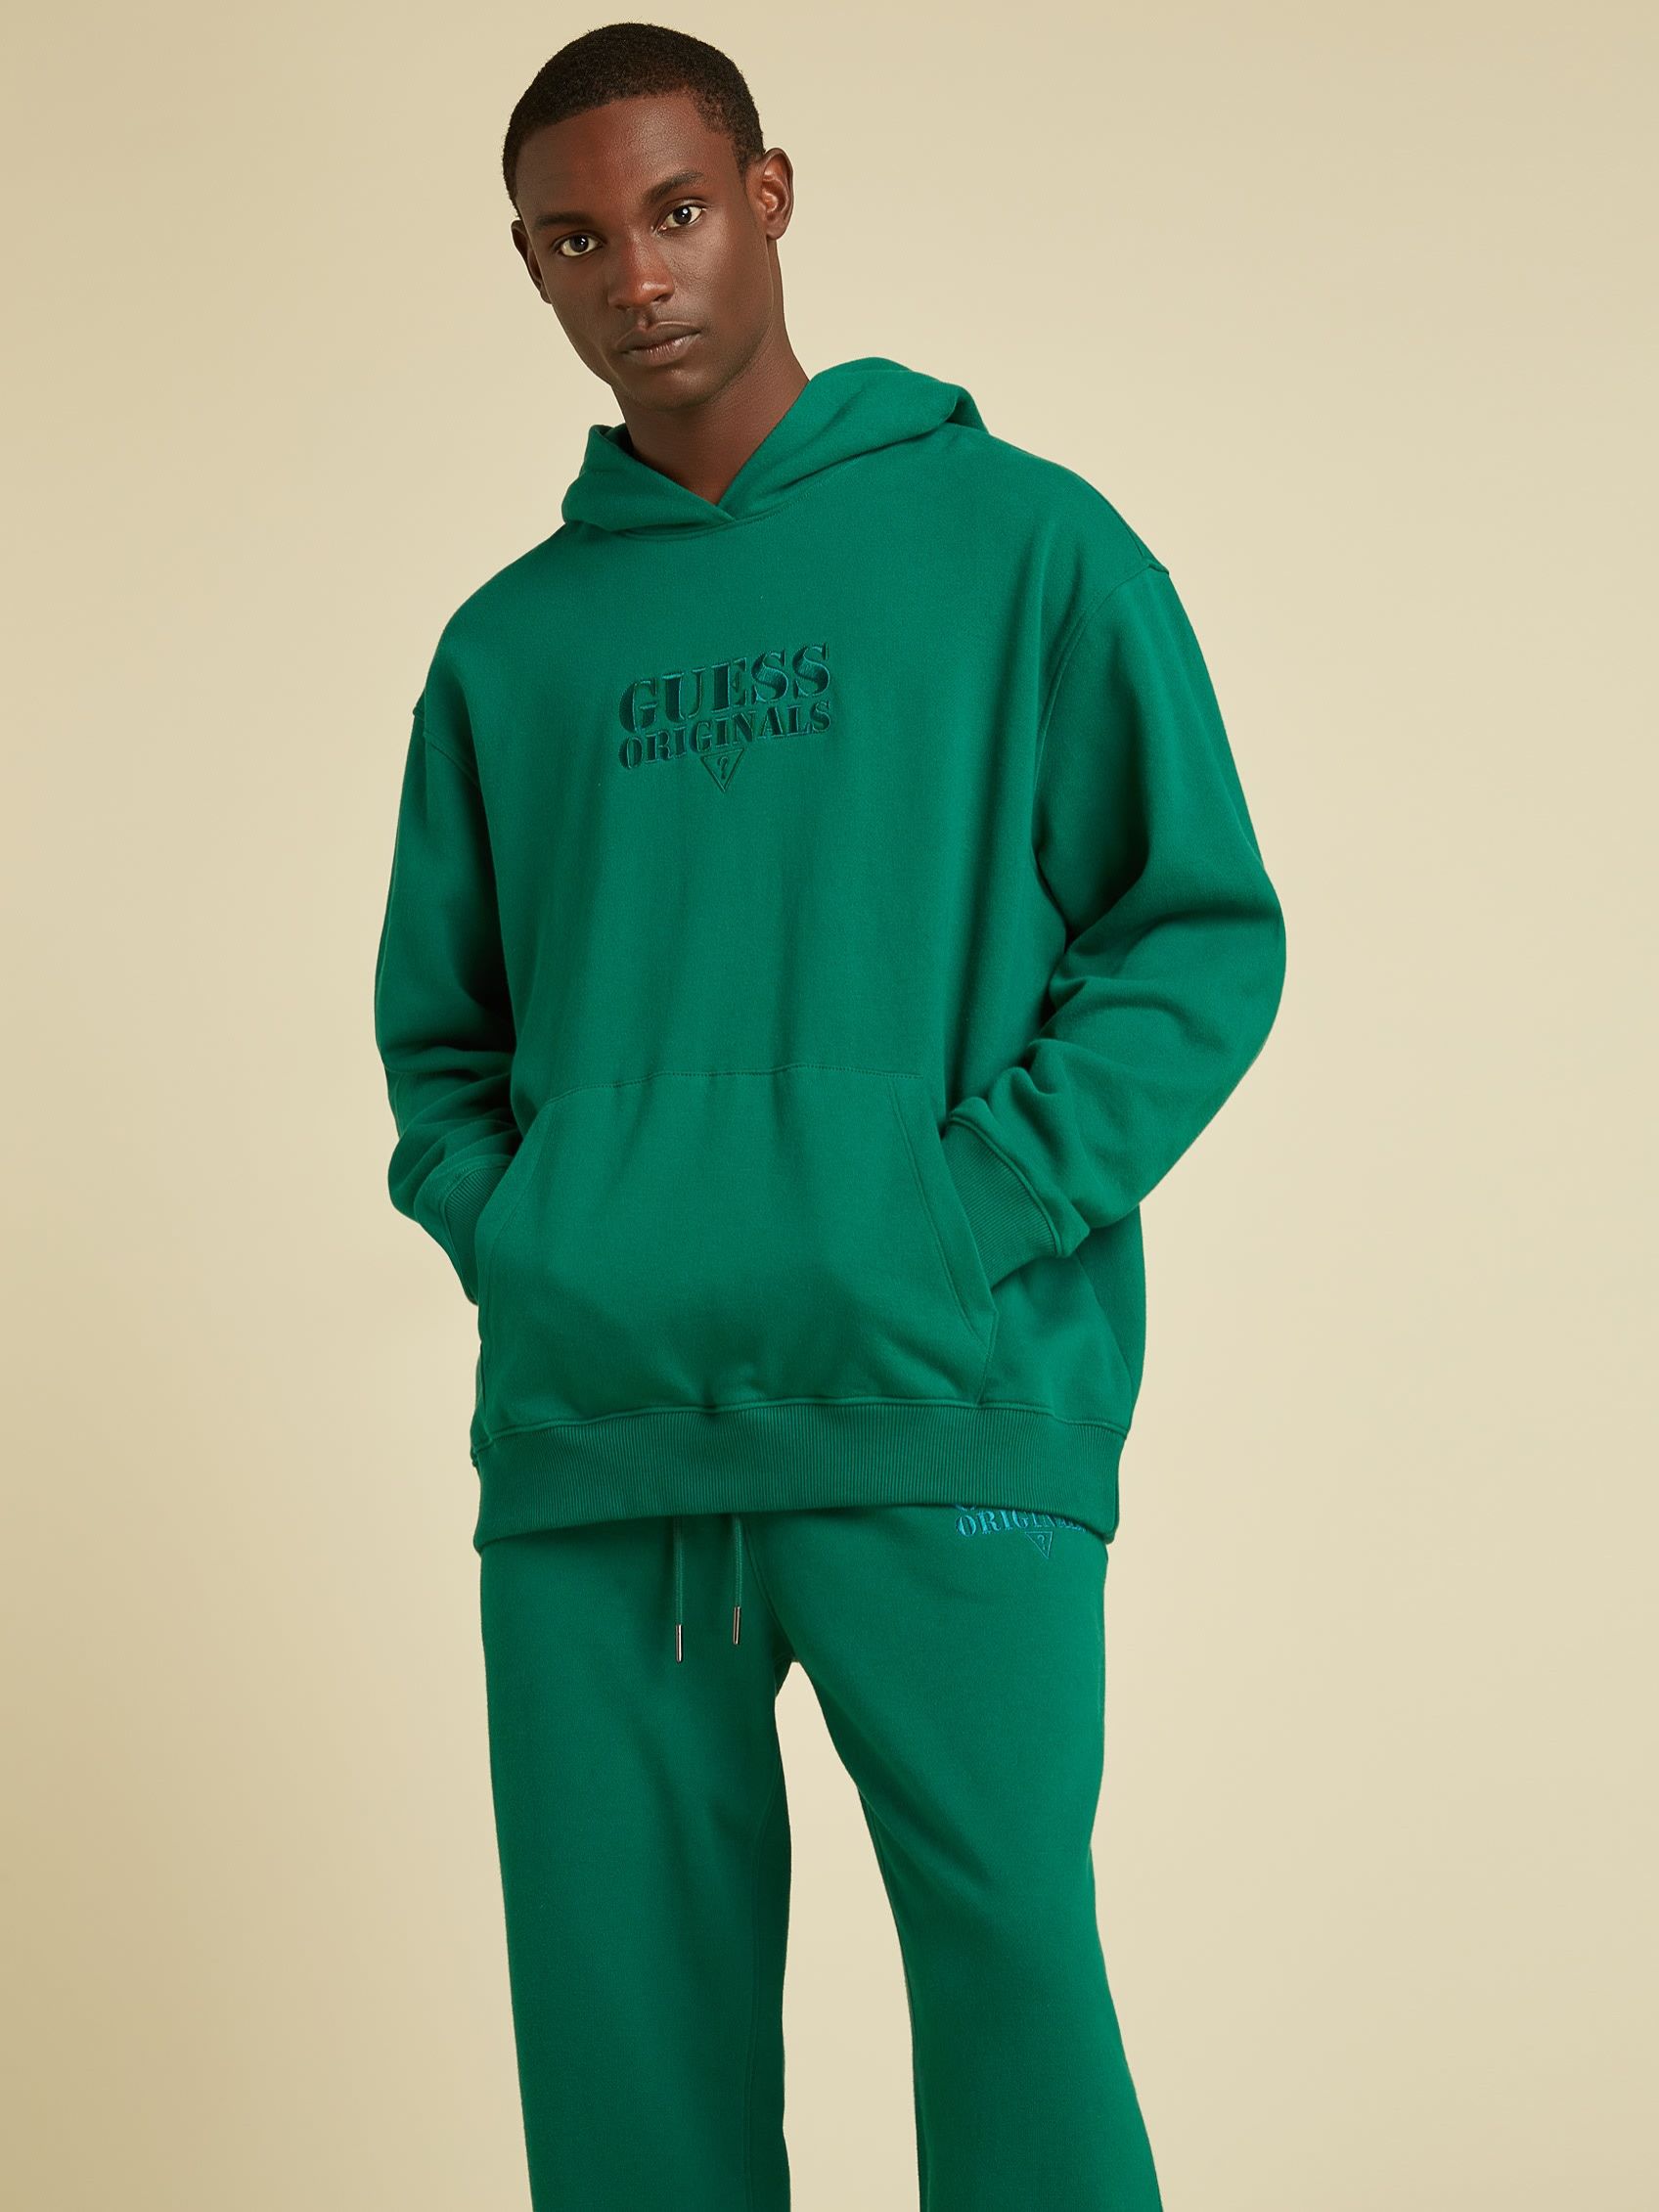 GUESS Originals SHAWN KIT LOGO HOODIE | Guess Philippines